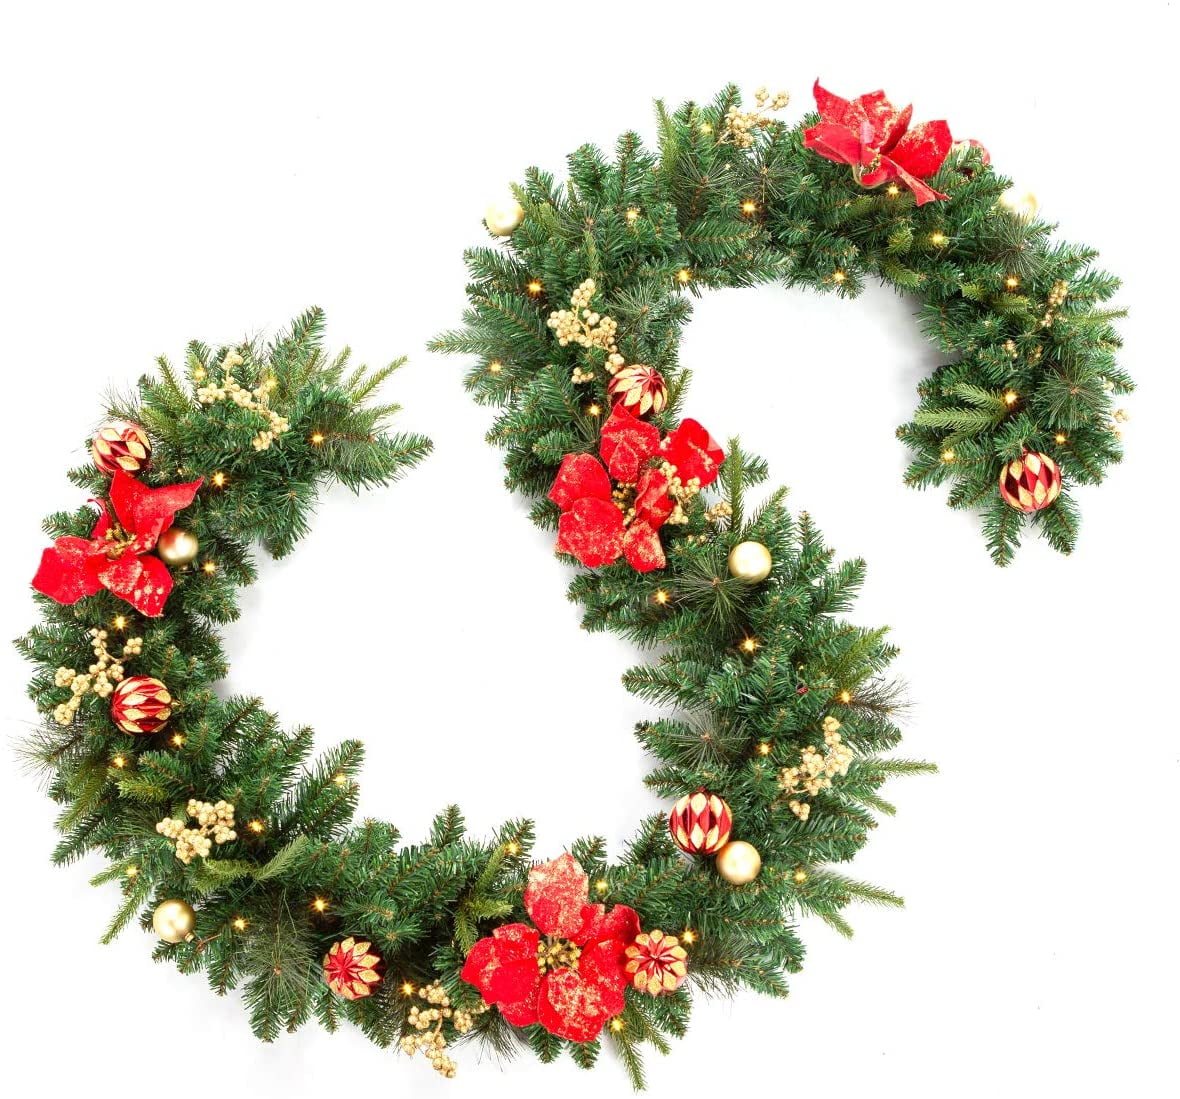 Garland Battery Operated, Light Up Wreath Outdoor Battery Operated